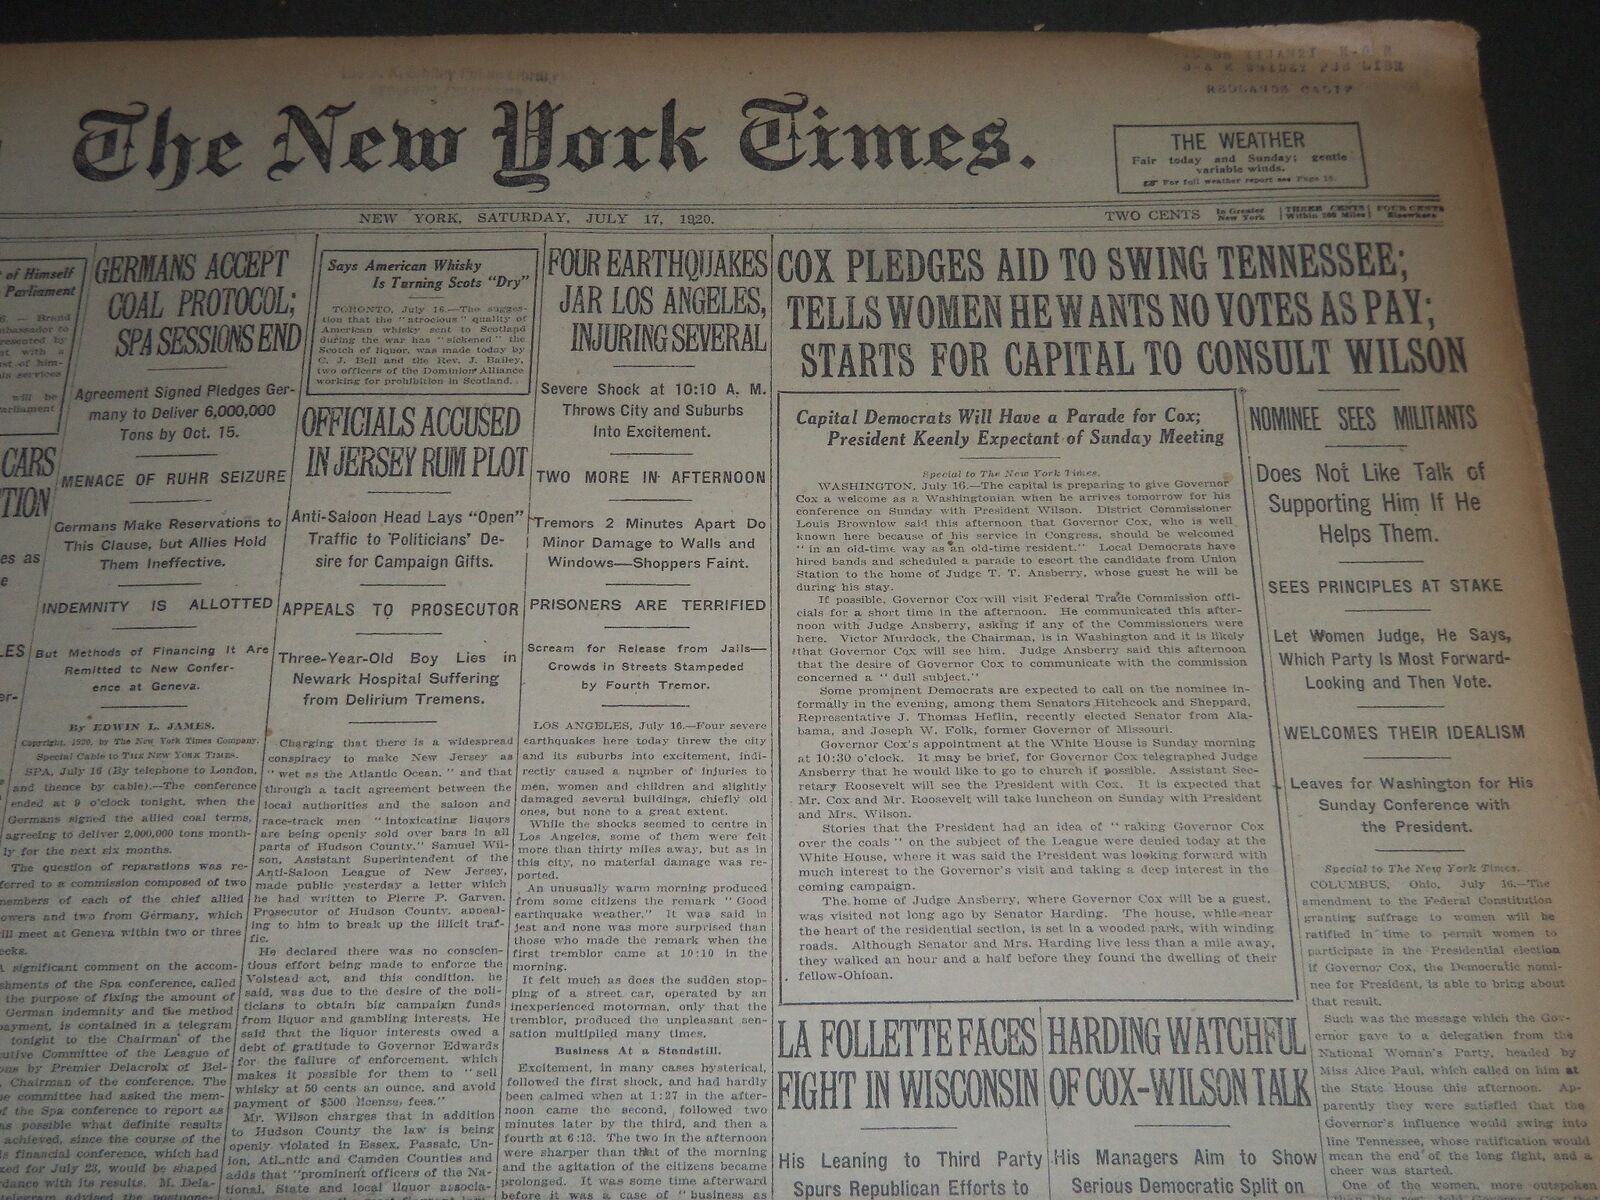 1920 JULY 17 NEW YORK TIMES - COX PLEDGES AID TO SWING TENNESSEE - NT 6753